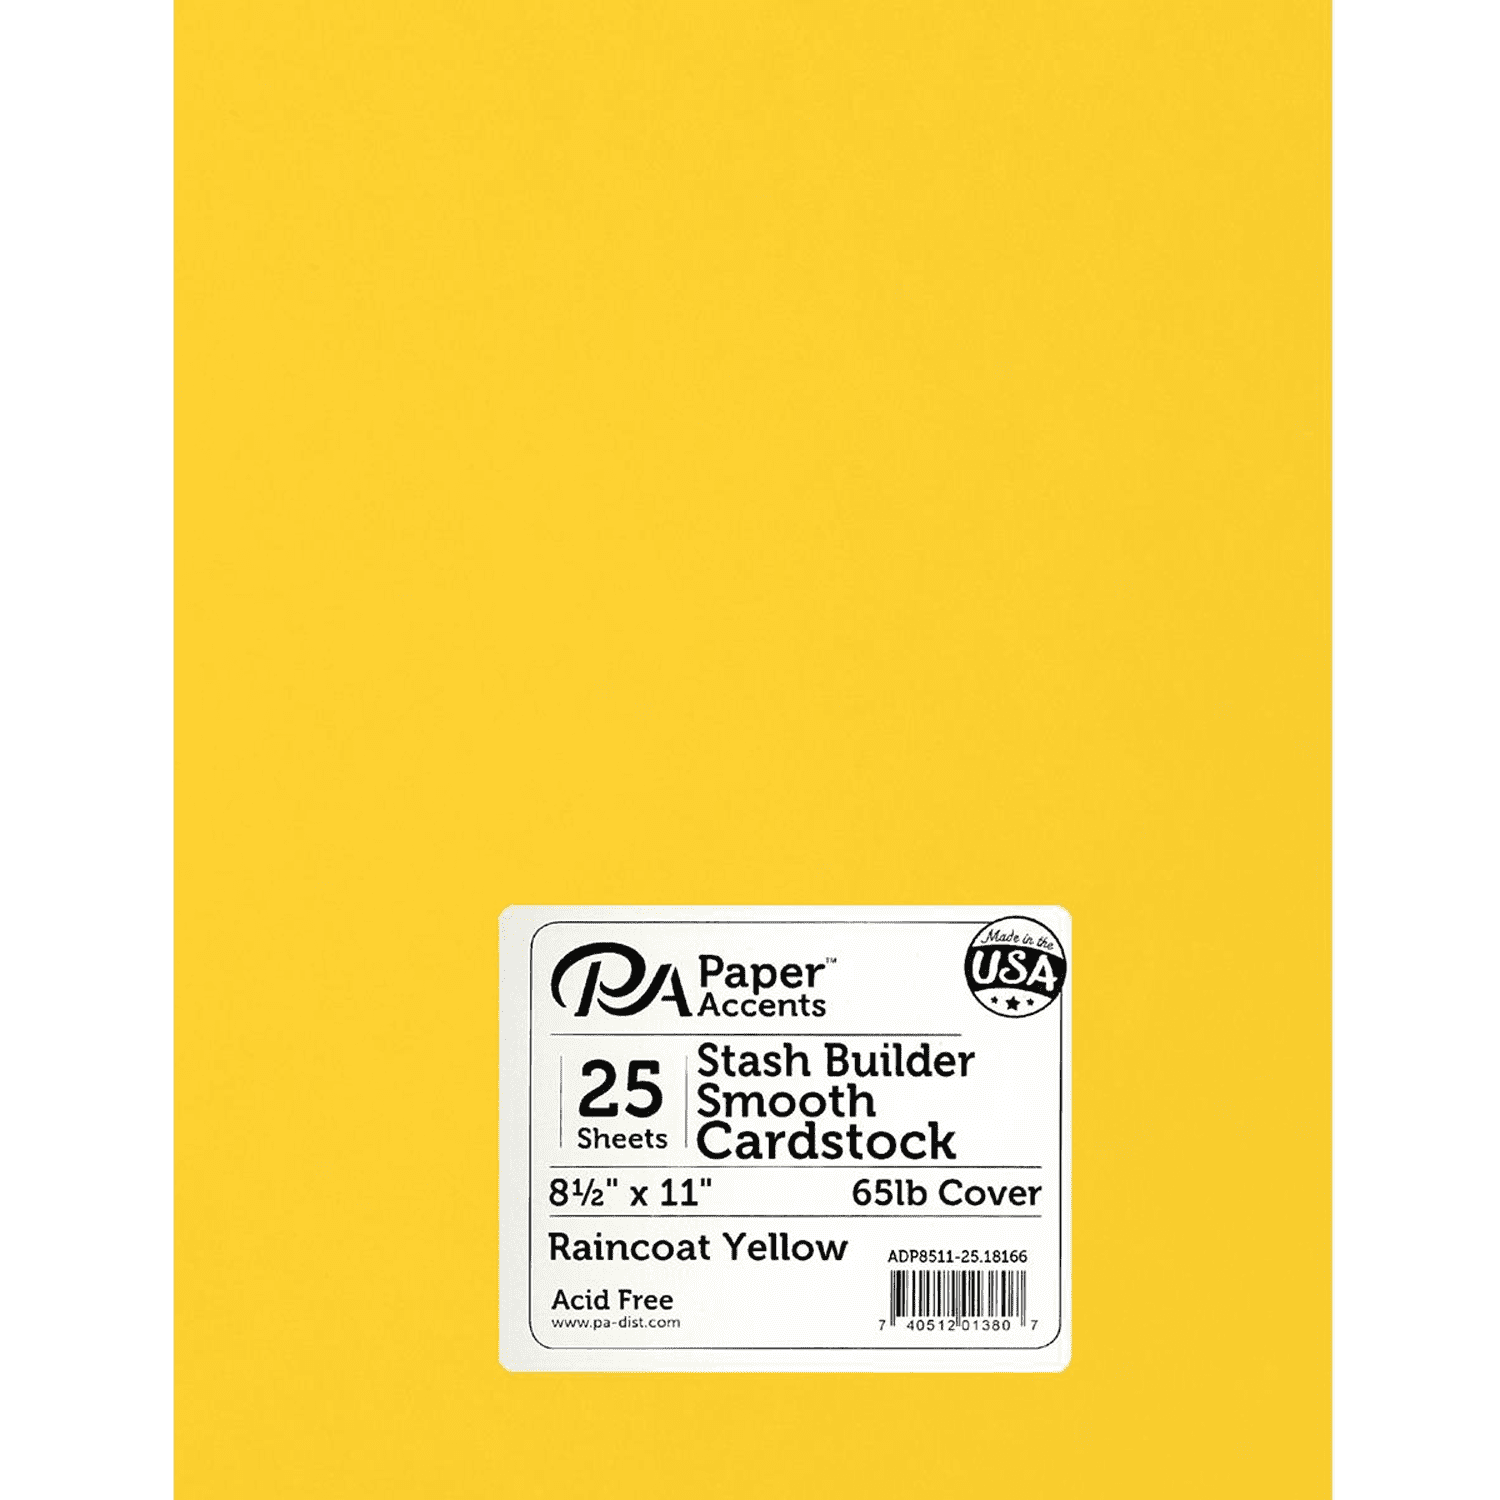 PA Paper Accents Variety Cardstock Pack - 8-1/2-inch x 11-inch - 72 Piece -  65-pounds - Essential